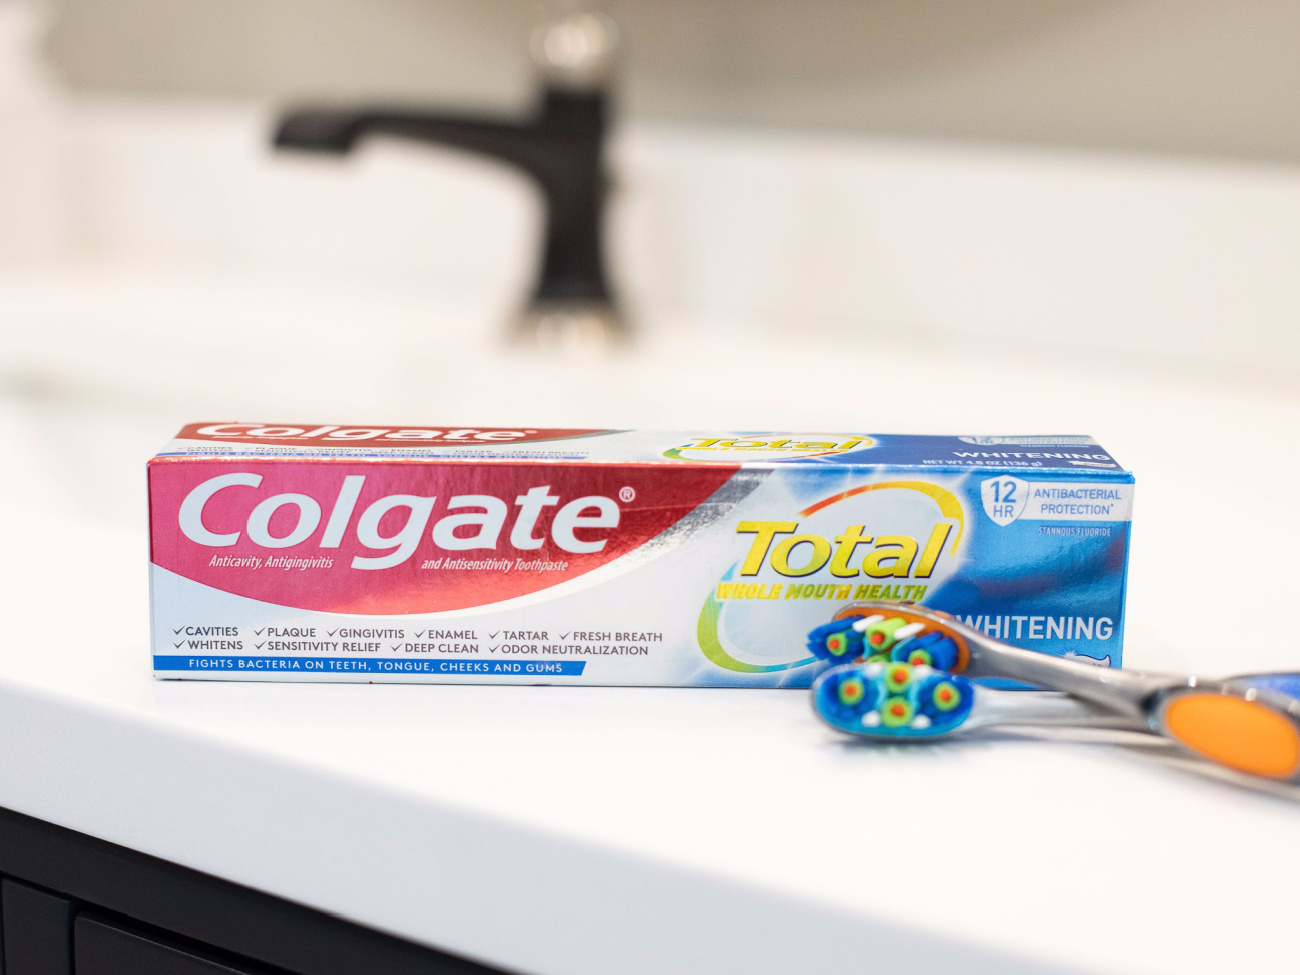 Don’t Forget To Grab FOUR Tubes of Colgate Total Toothpaste For As Low As FREE At Publix